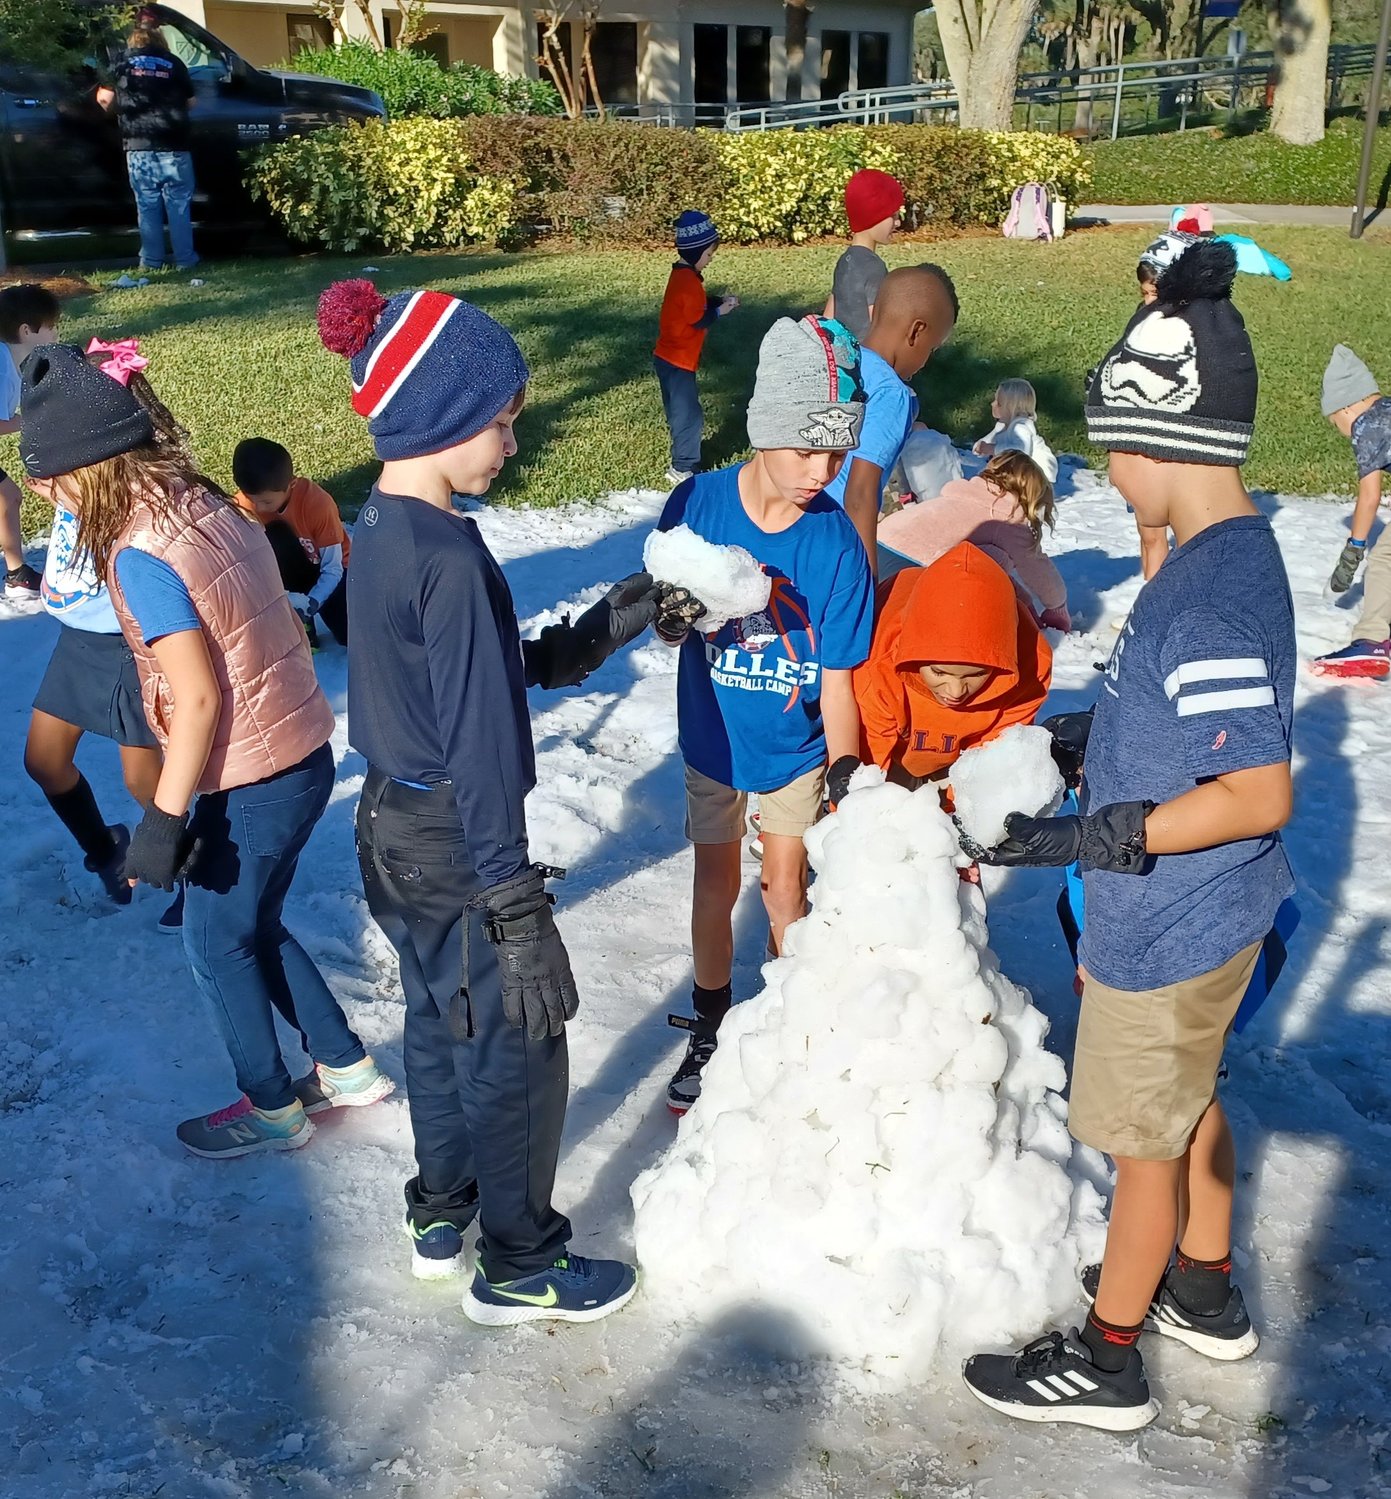 Bolles Lower School Ponte Vedra Beach students build a snowman during Winter Fest.